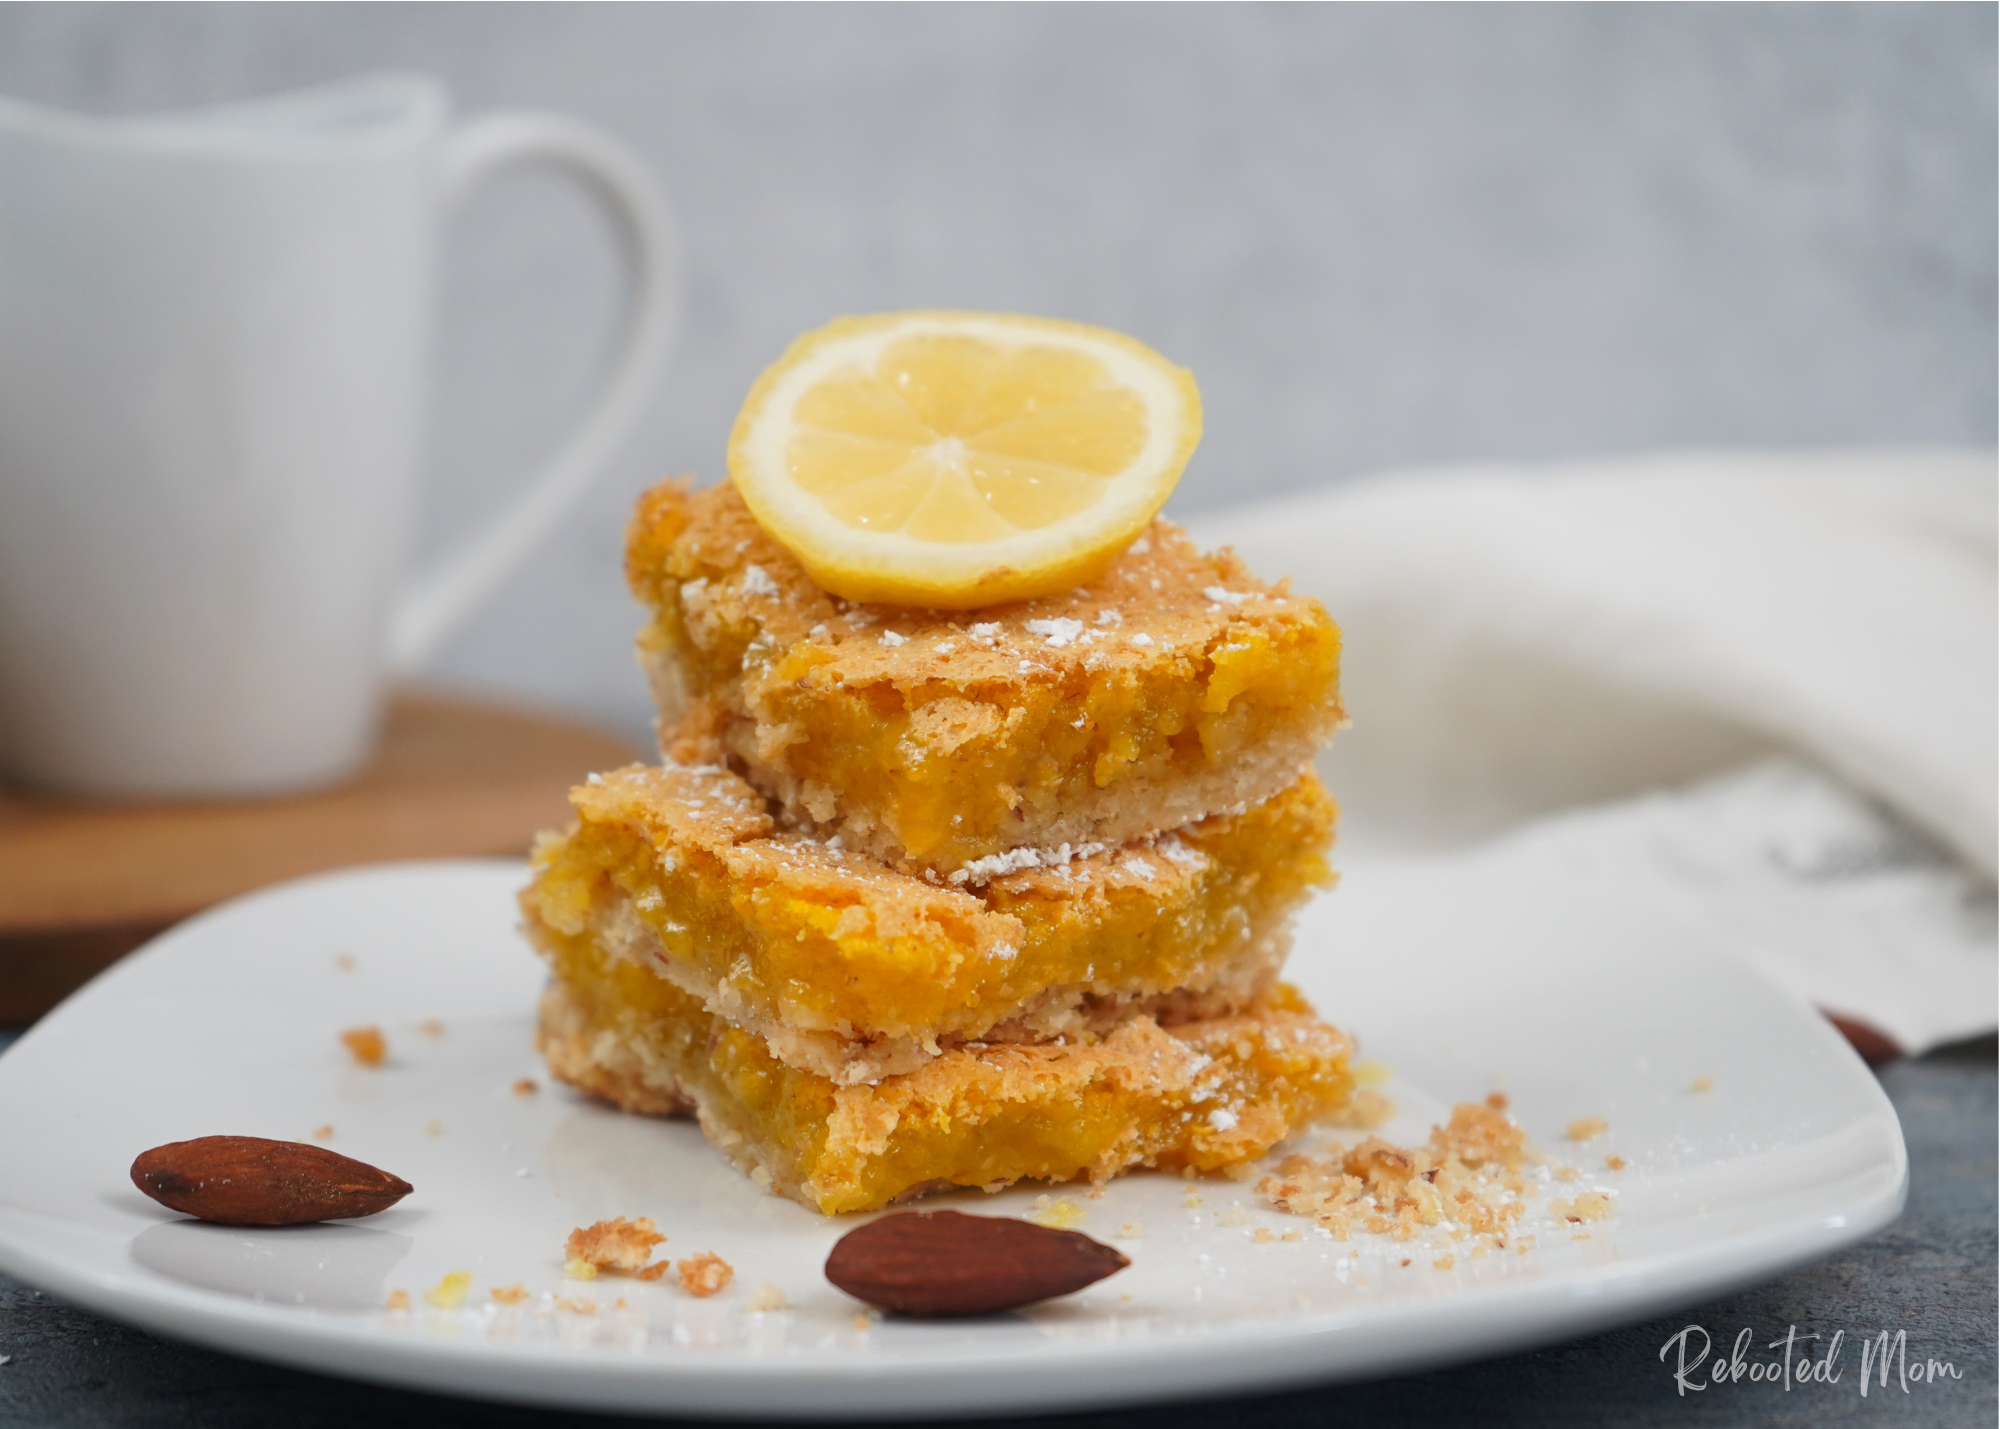 Dreamy Lemon Almond Bars that combine lemon zest with almonds for a delicious bar that's perfect for a spring and summertime dessert!